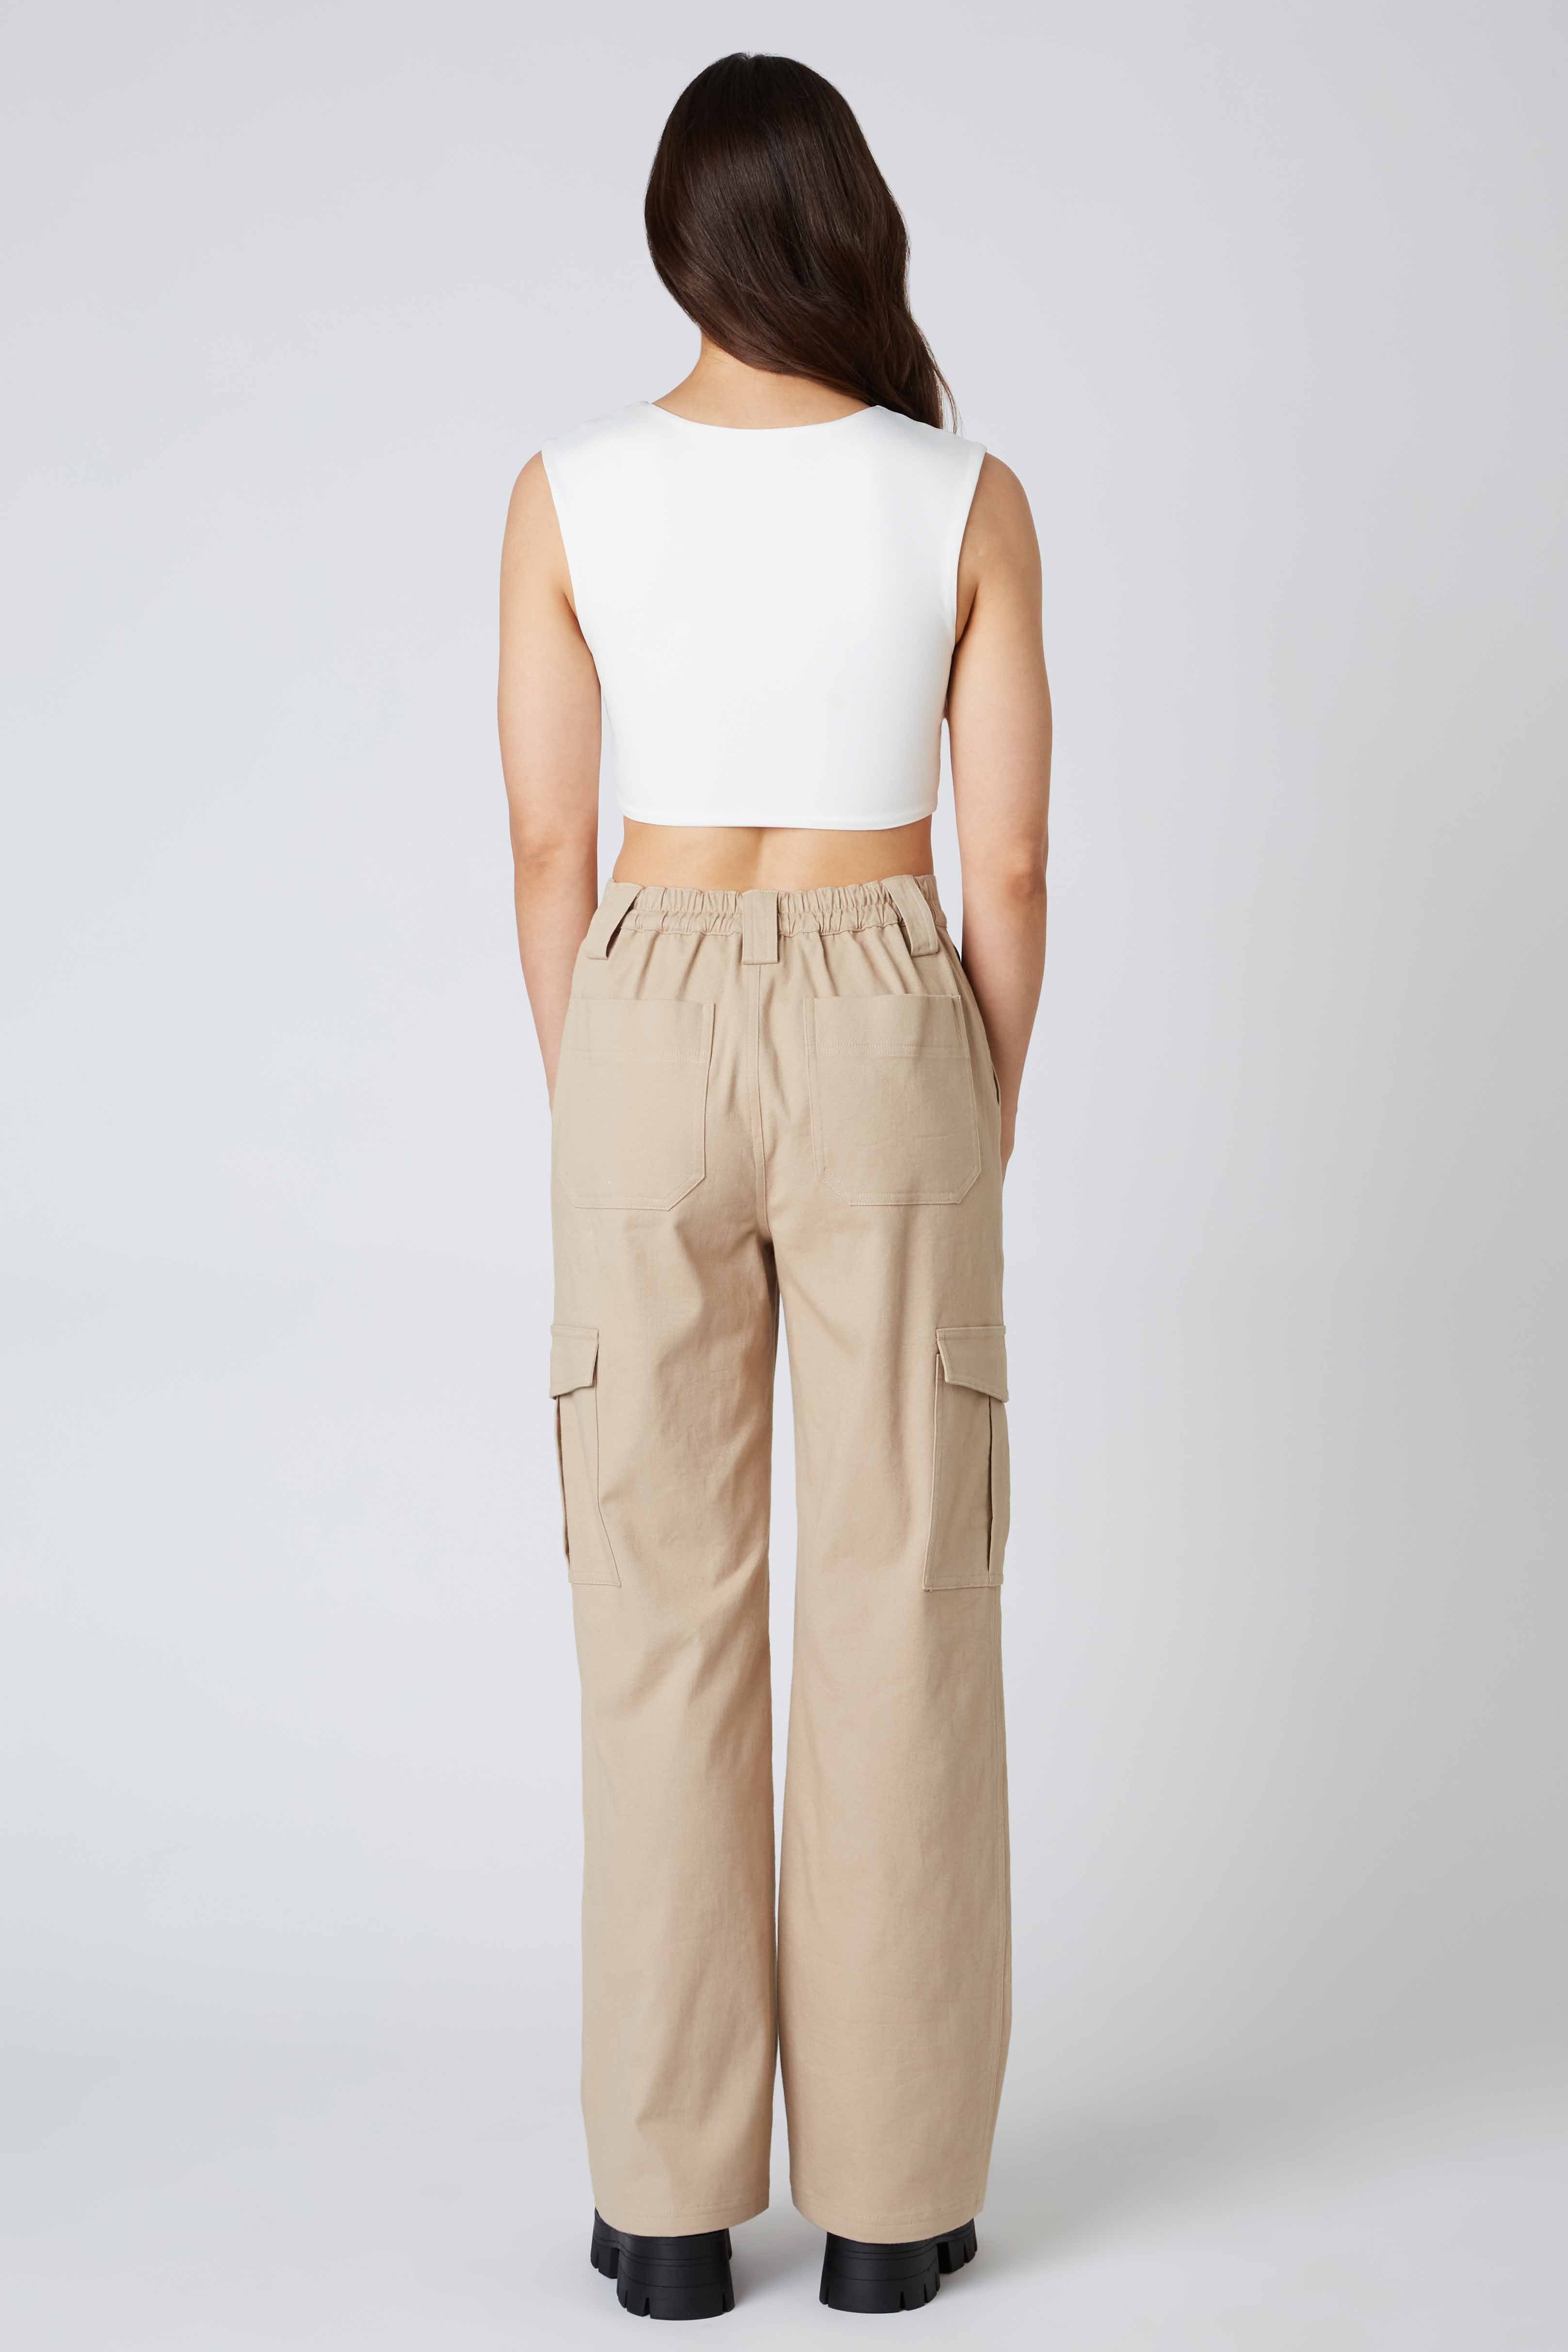 Twill Cargo Pants in Taupe Back View